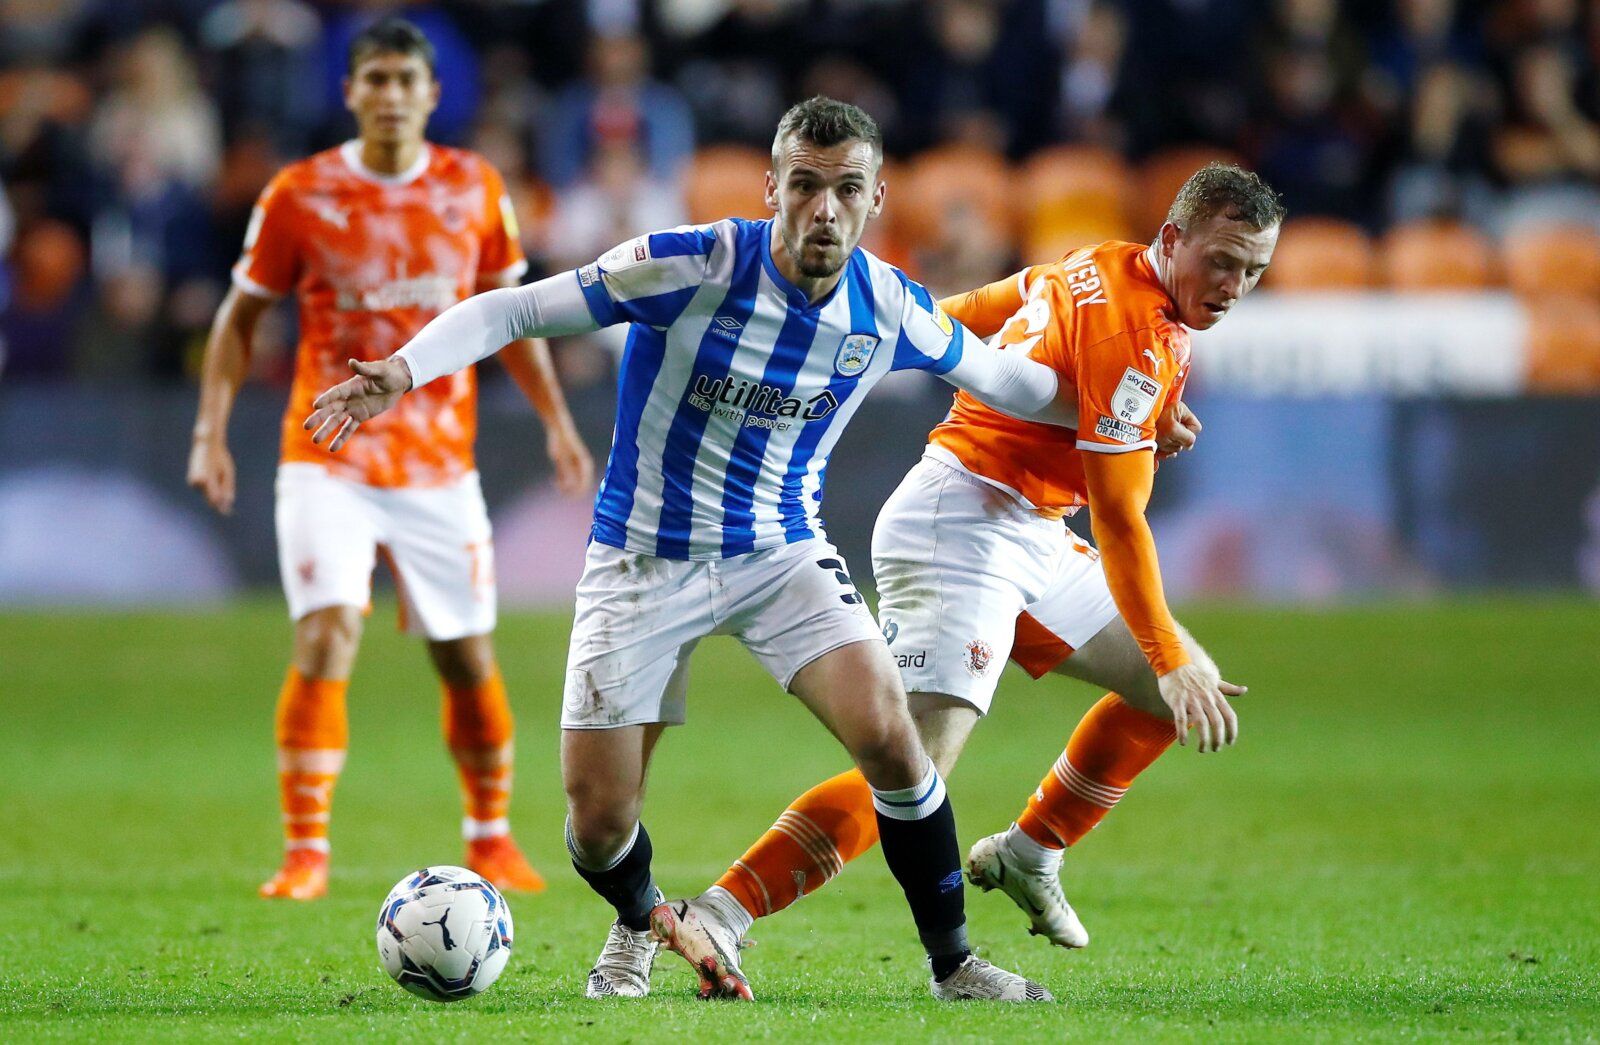 Soccer Football - Championship - Blackpool v Huddersfield Town - Bloomfield Road, Blackpool, Britain - September 14, 2021 Huddersfield Town's Harry Toffolo in action with Blackpool's Shayne Lavery Action Images/Jason Cairnduff